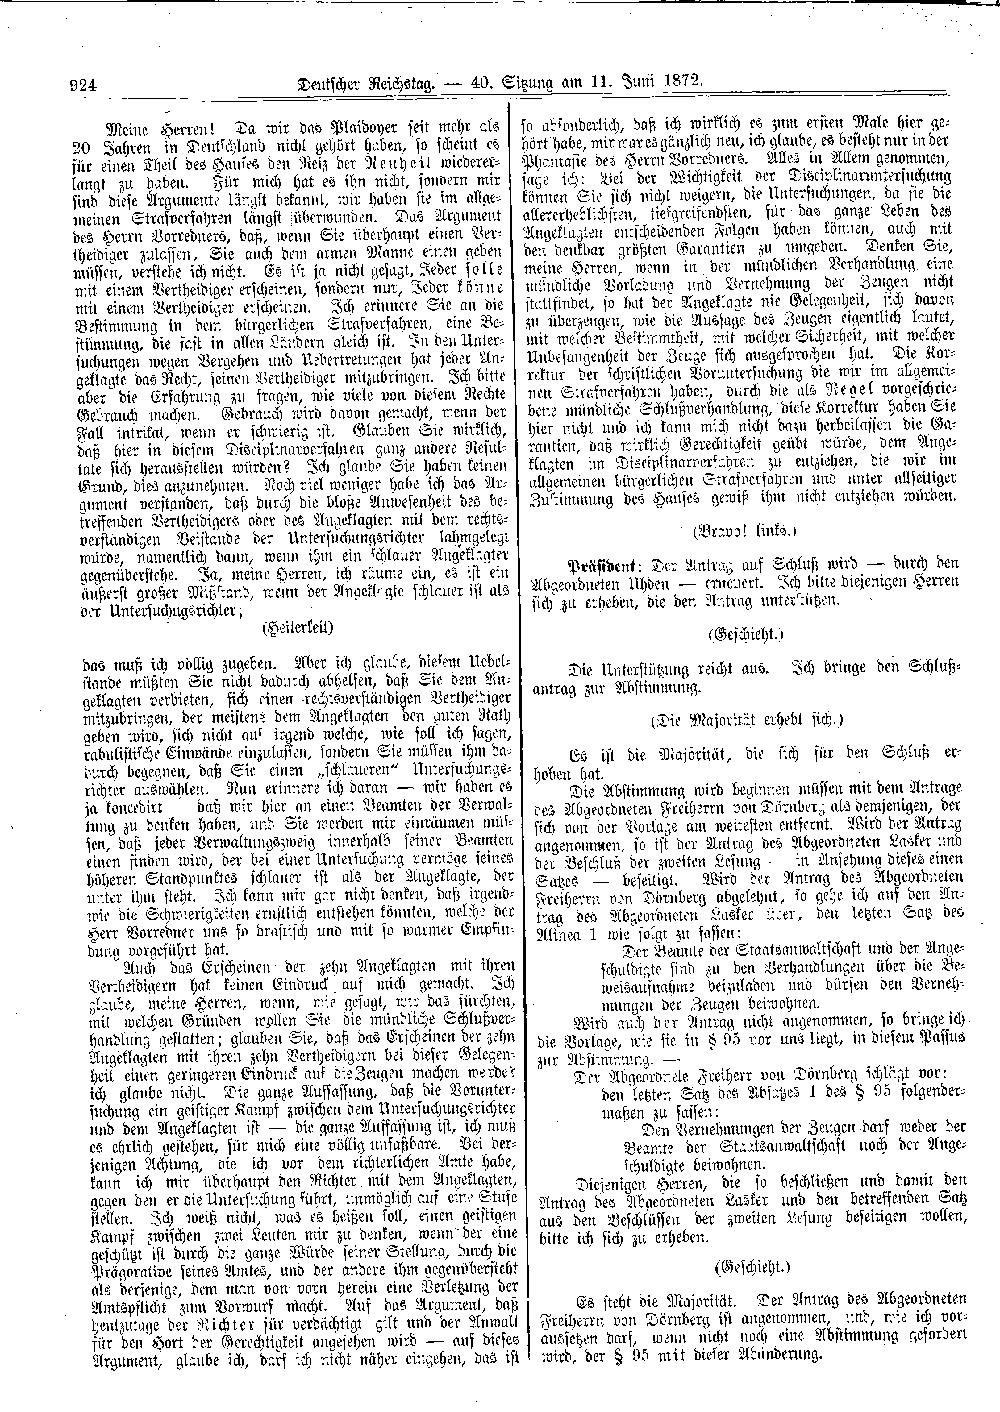 Scan of page 924